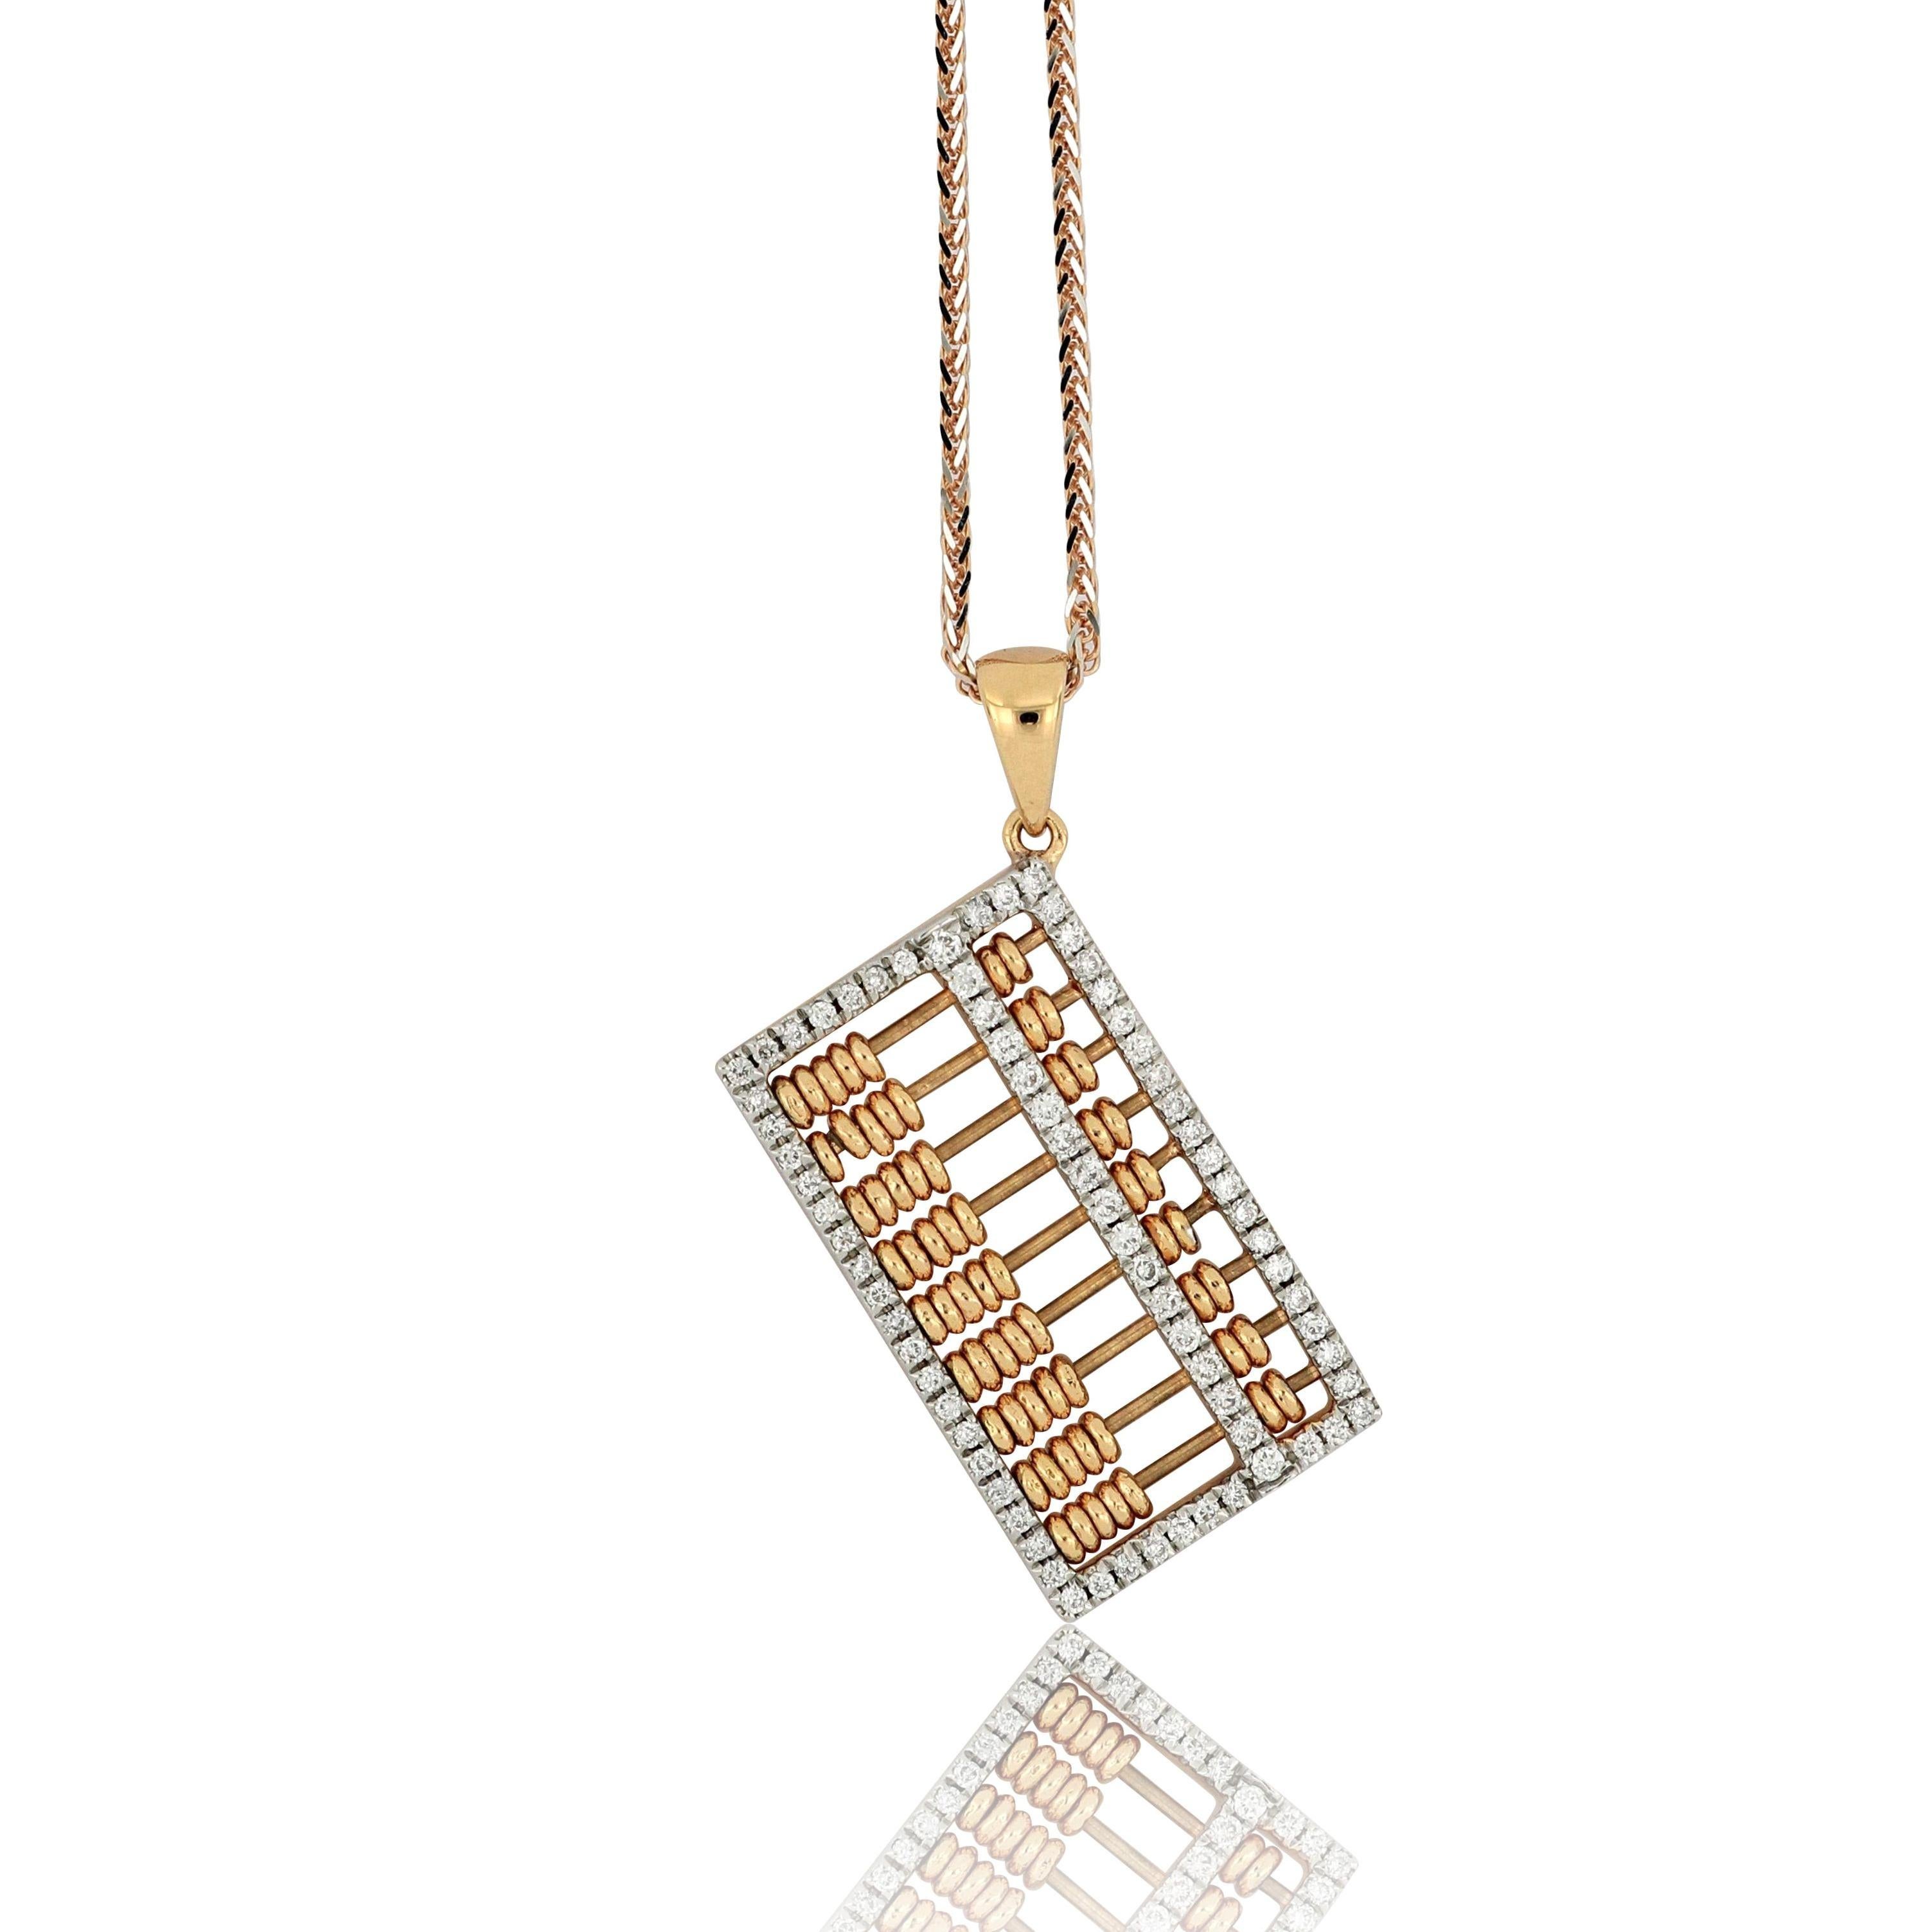 Abacus pendant with moving beads, set with diamonds  surround frame weighing 0.26 carats, mounted in 18 Karat rose gold.
Abacus, invented in ancient China  more than 2,600 years ago, is a traditional computing tool for businesses and widely used in